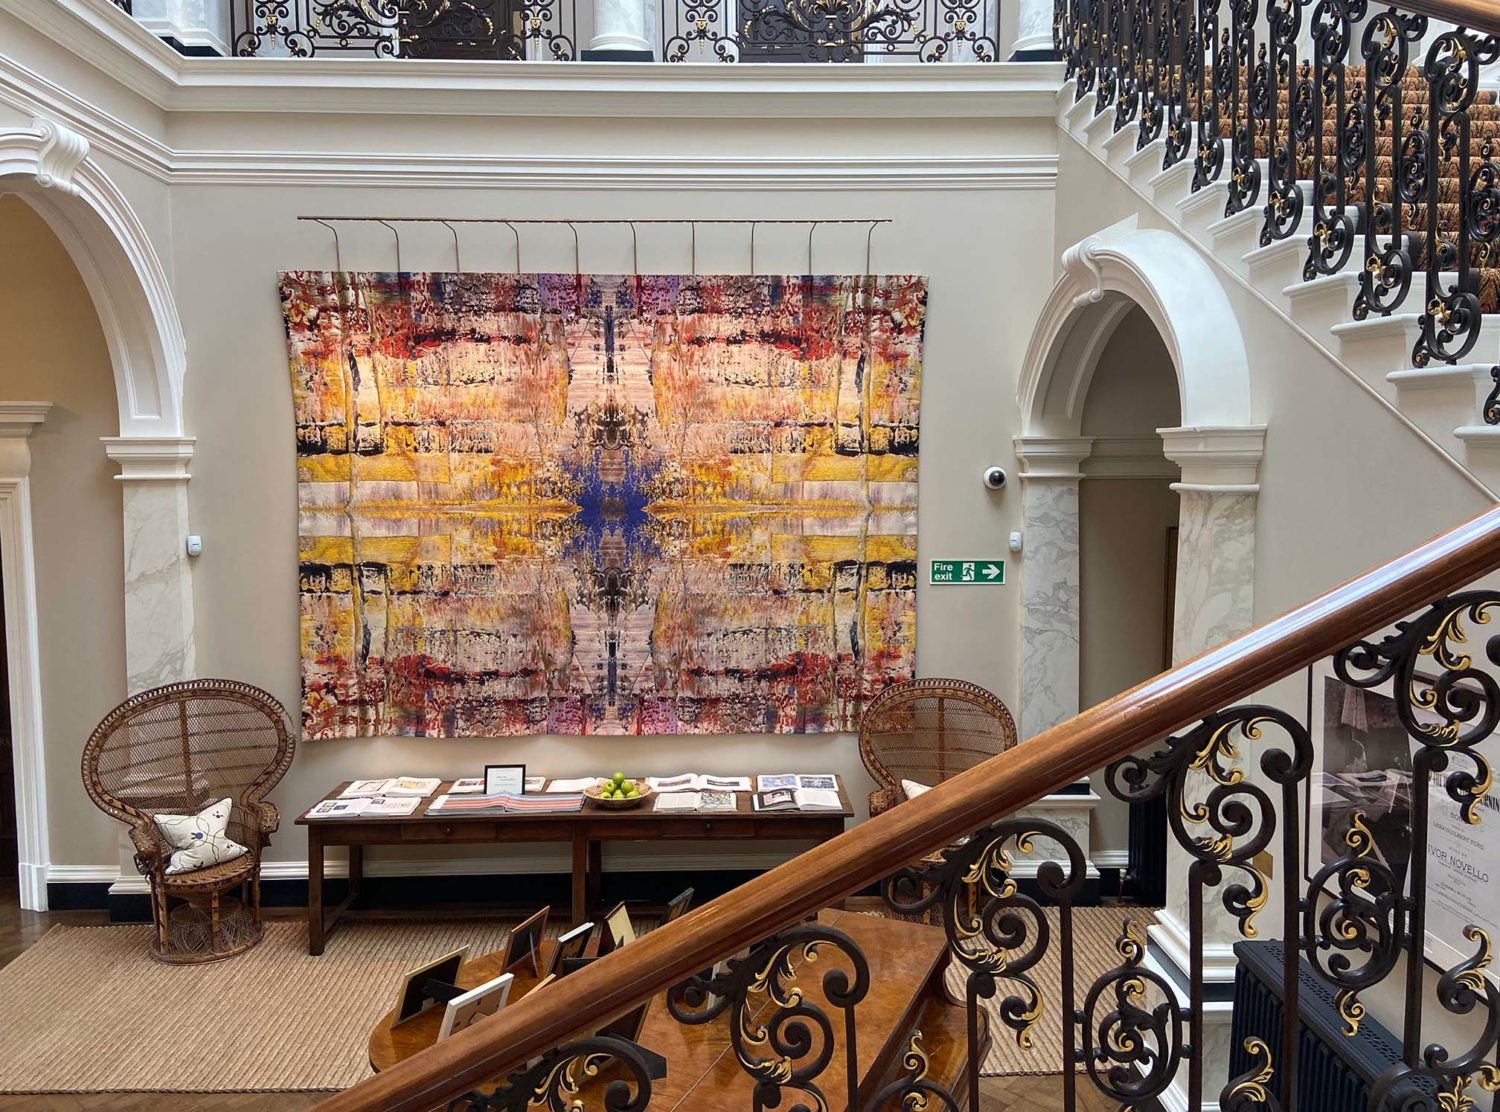 Beaverbrook Gerhard Richter tapestry hanging by the main staircase